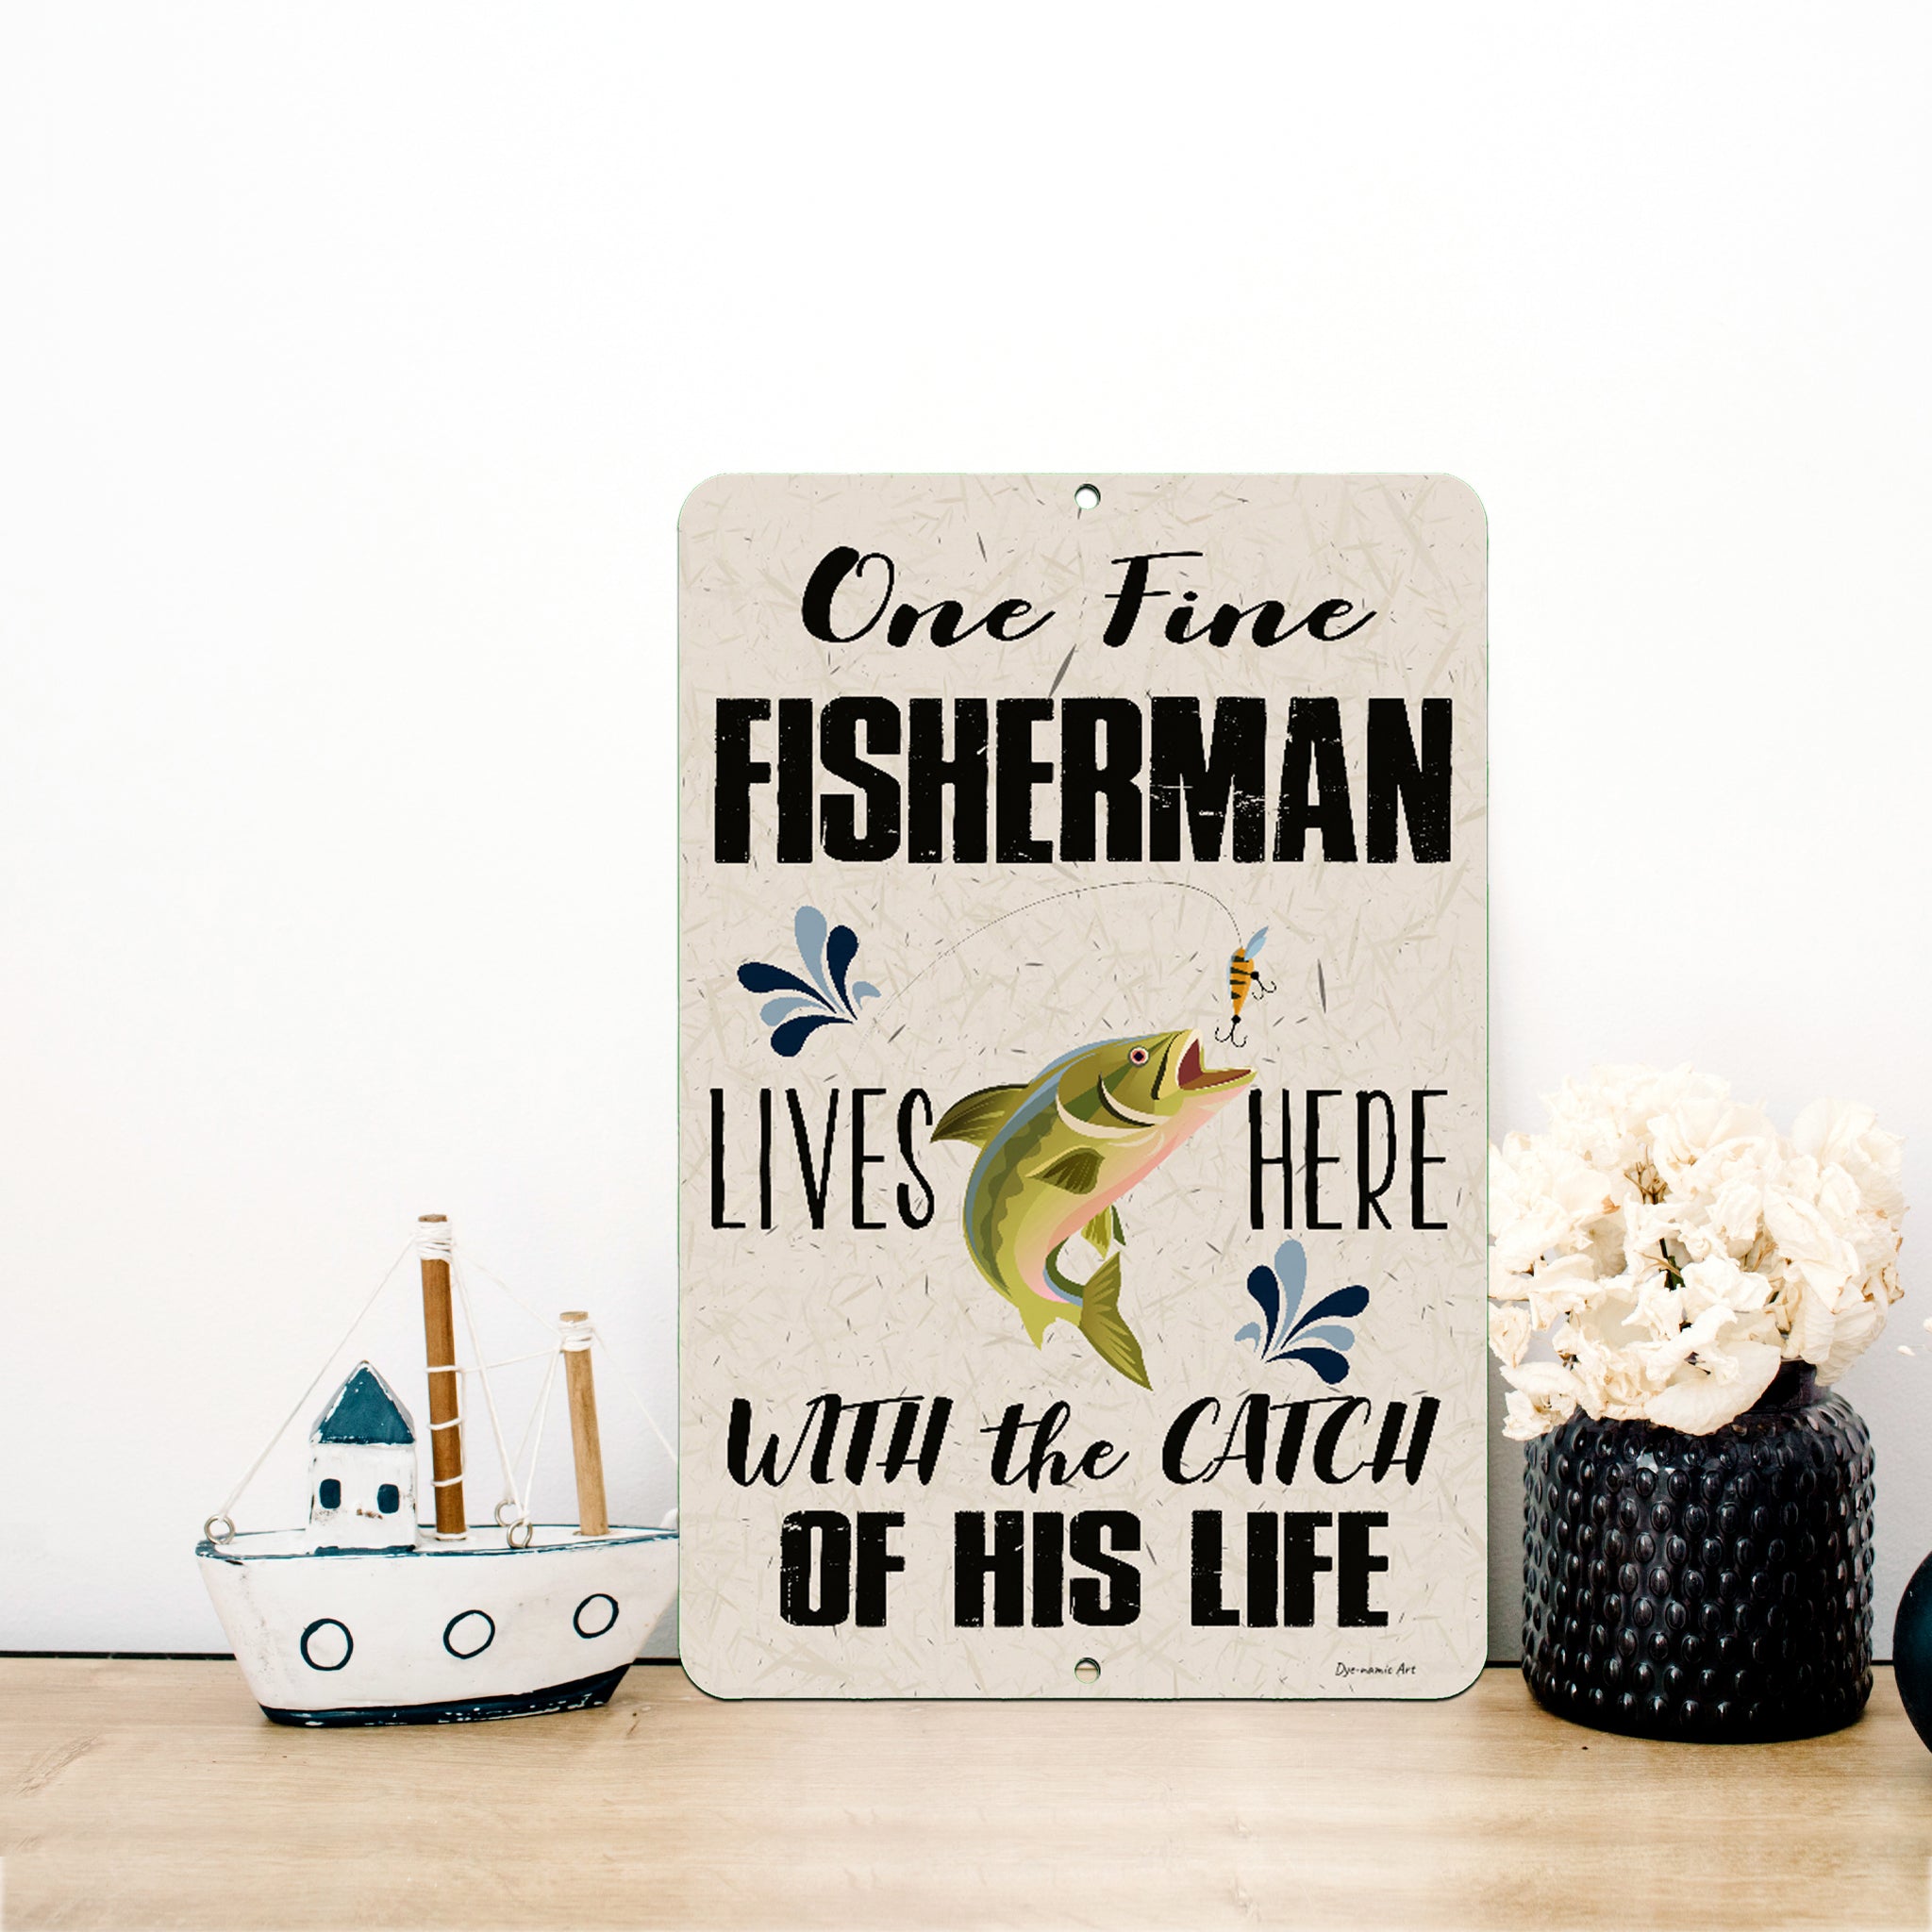 One Fine Fisherman - Fishing Quote Metal Sign 12x18